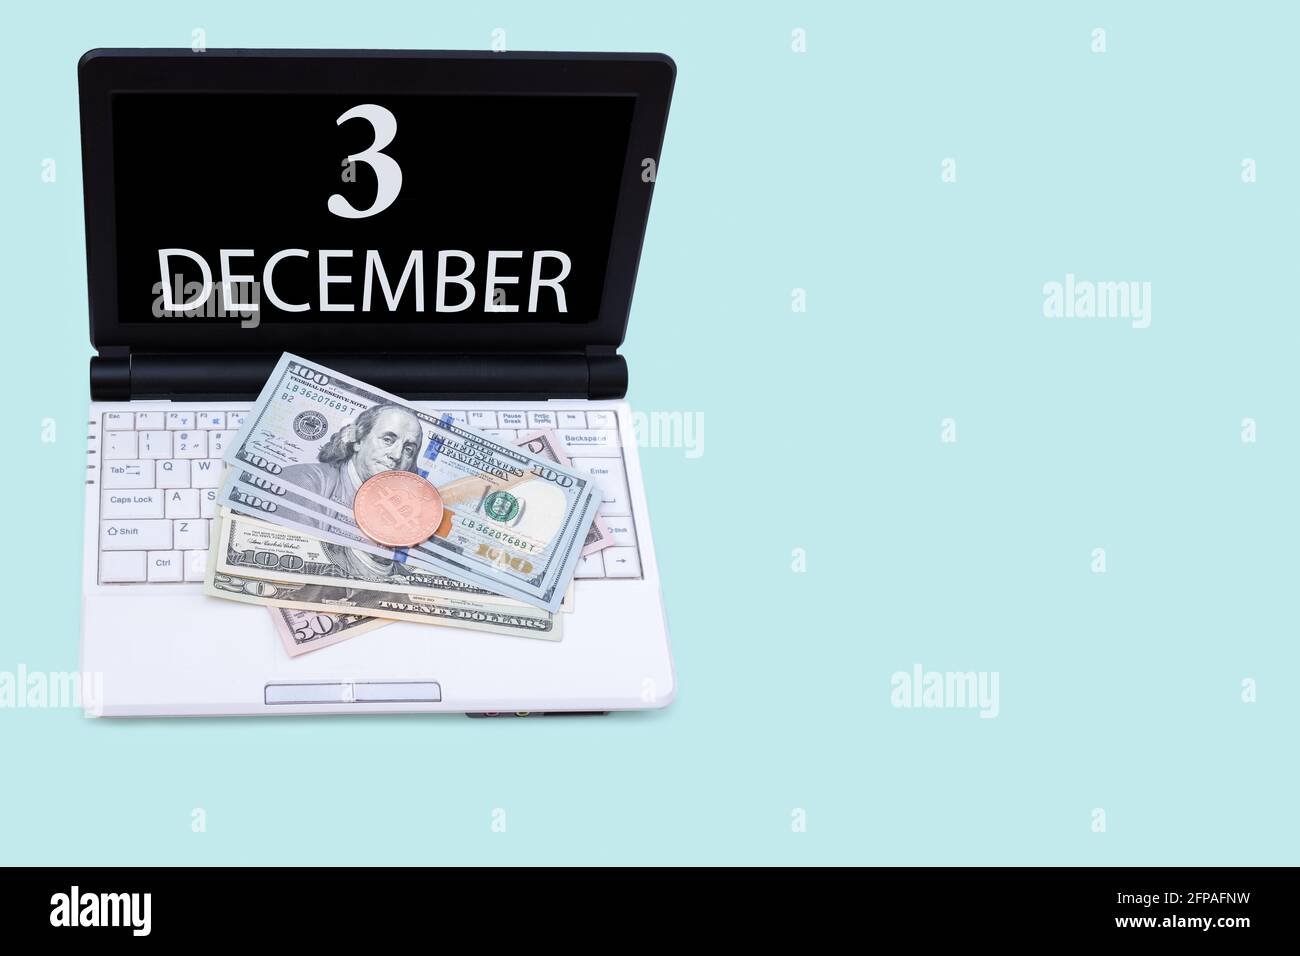 3rd day of december. Laptop with the date of 3 december and cryptocurrency Bitcoin, dollars on a blue background. Buy or sell cryptocurrency. Stock ma Stock Photo